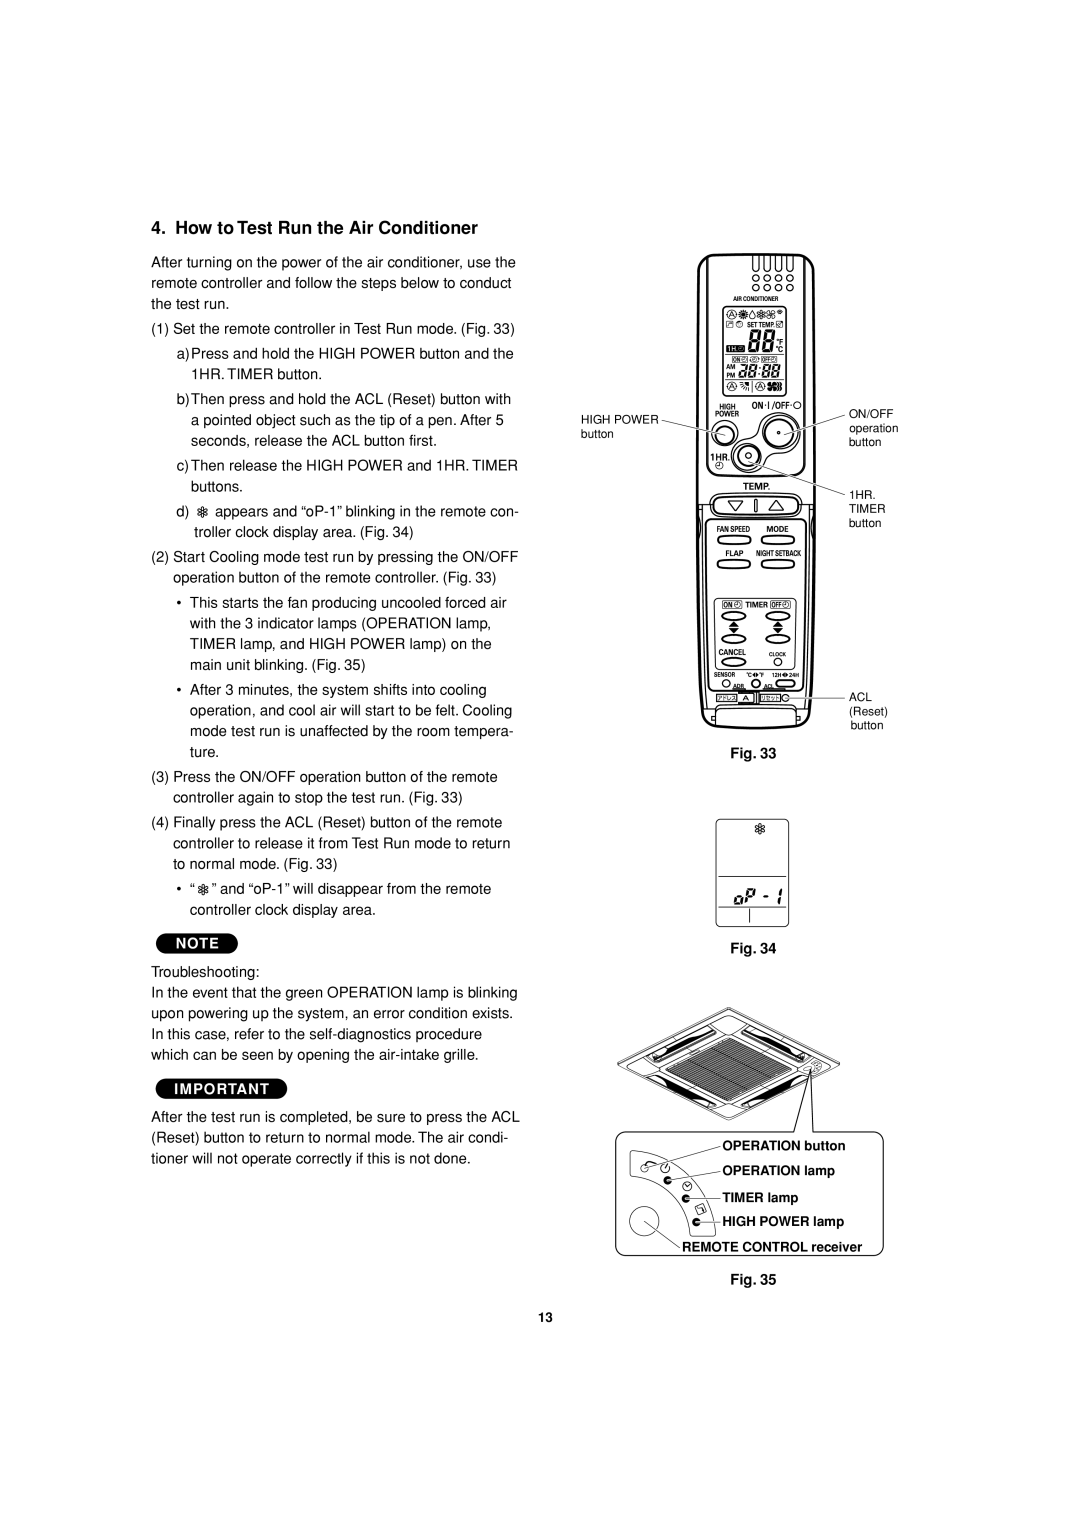 Sanyo XMHS0972, XMHS1272 service manual How to Test Run the Air Conditioner, Fig. Fig 